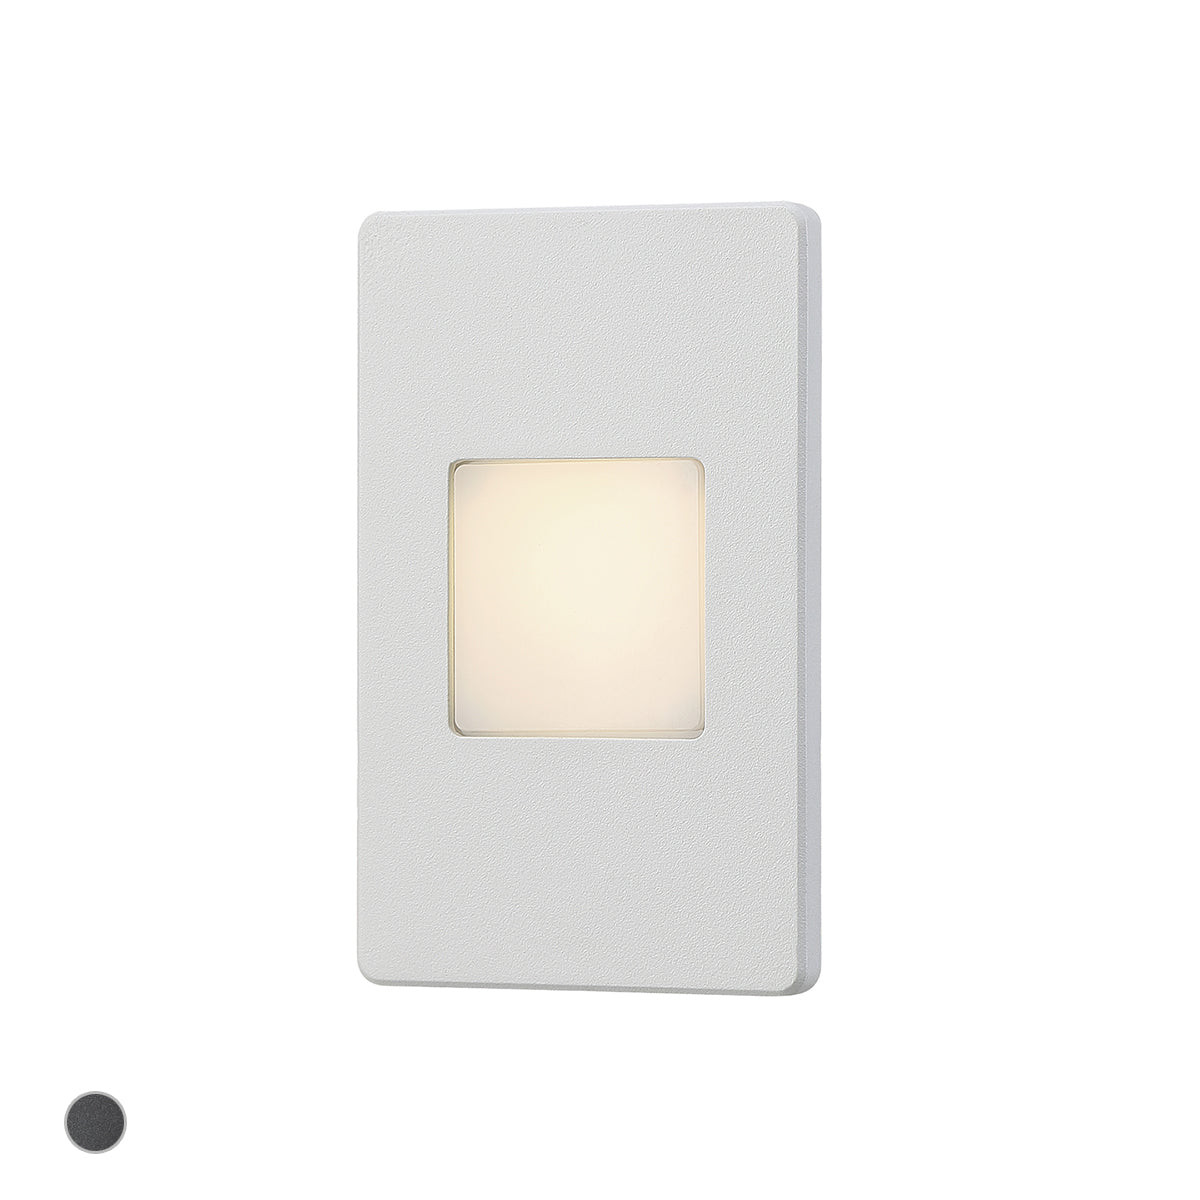 30286 1-Light LED Outdoor In-Wall